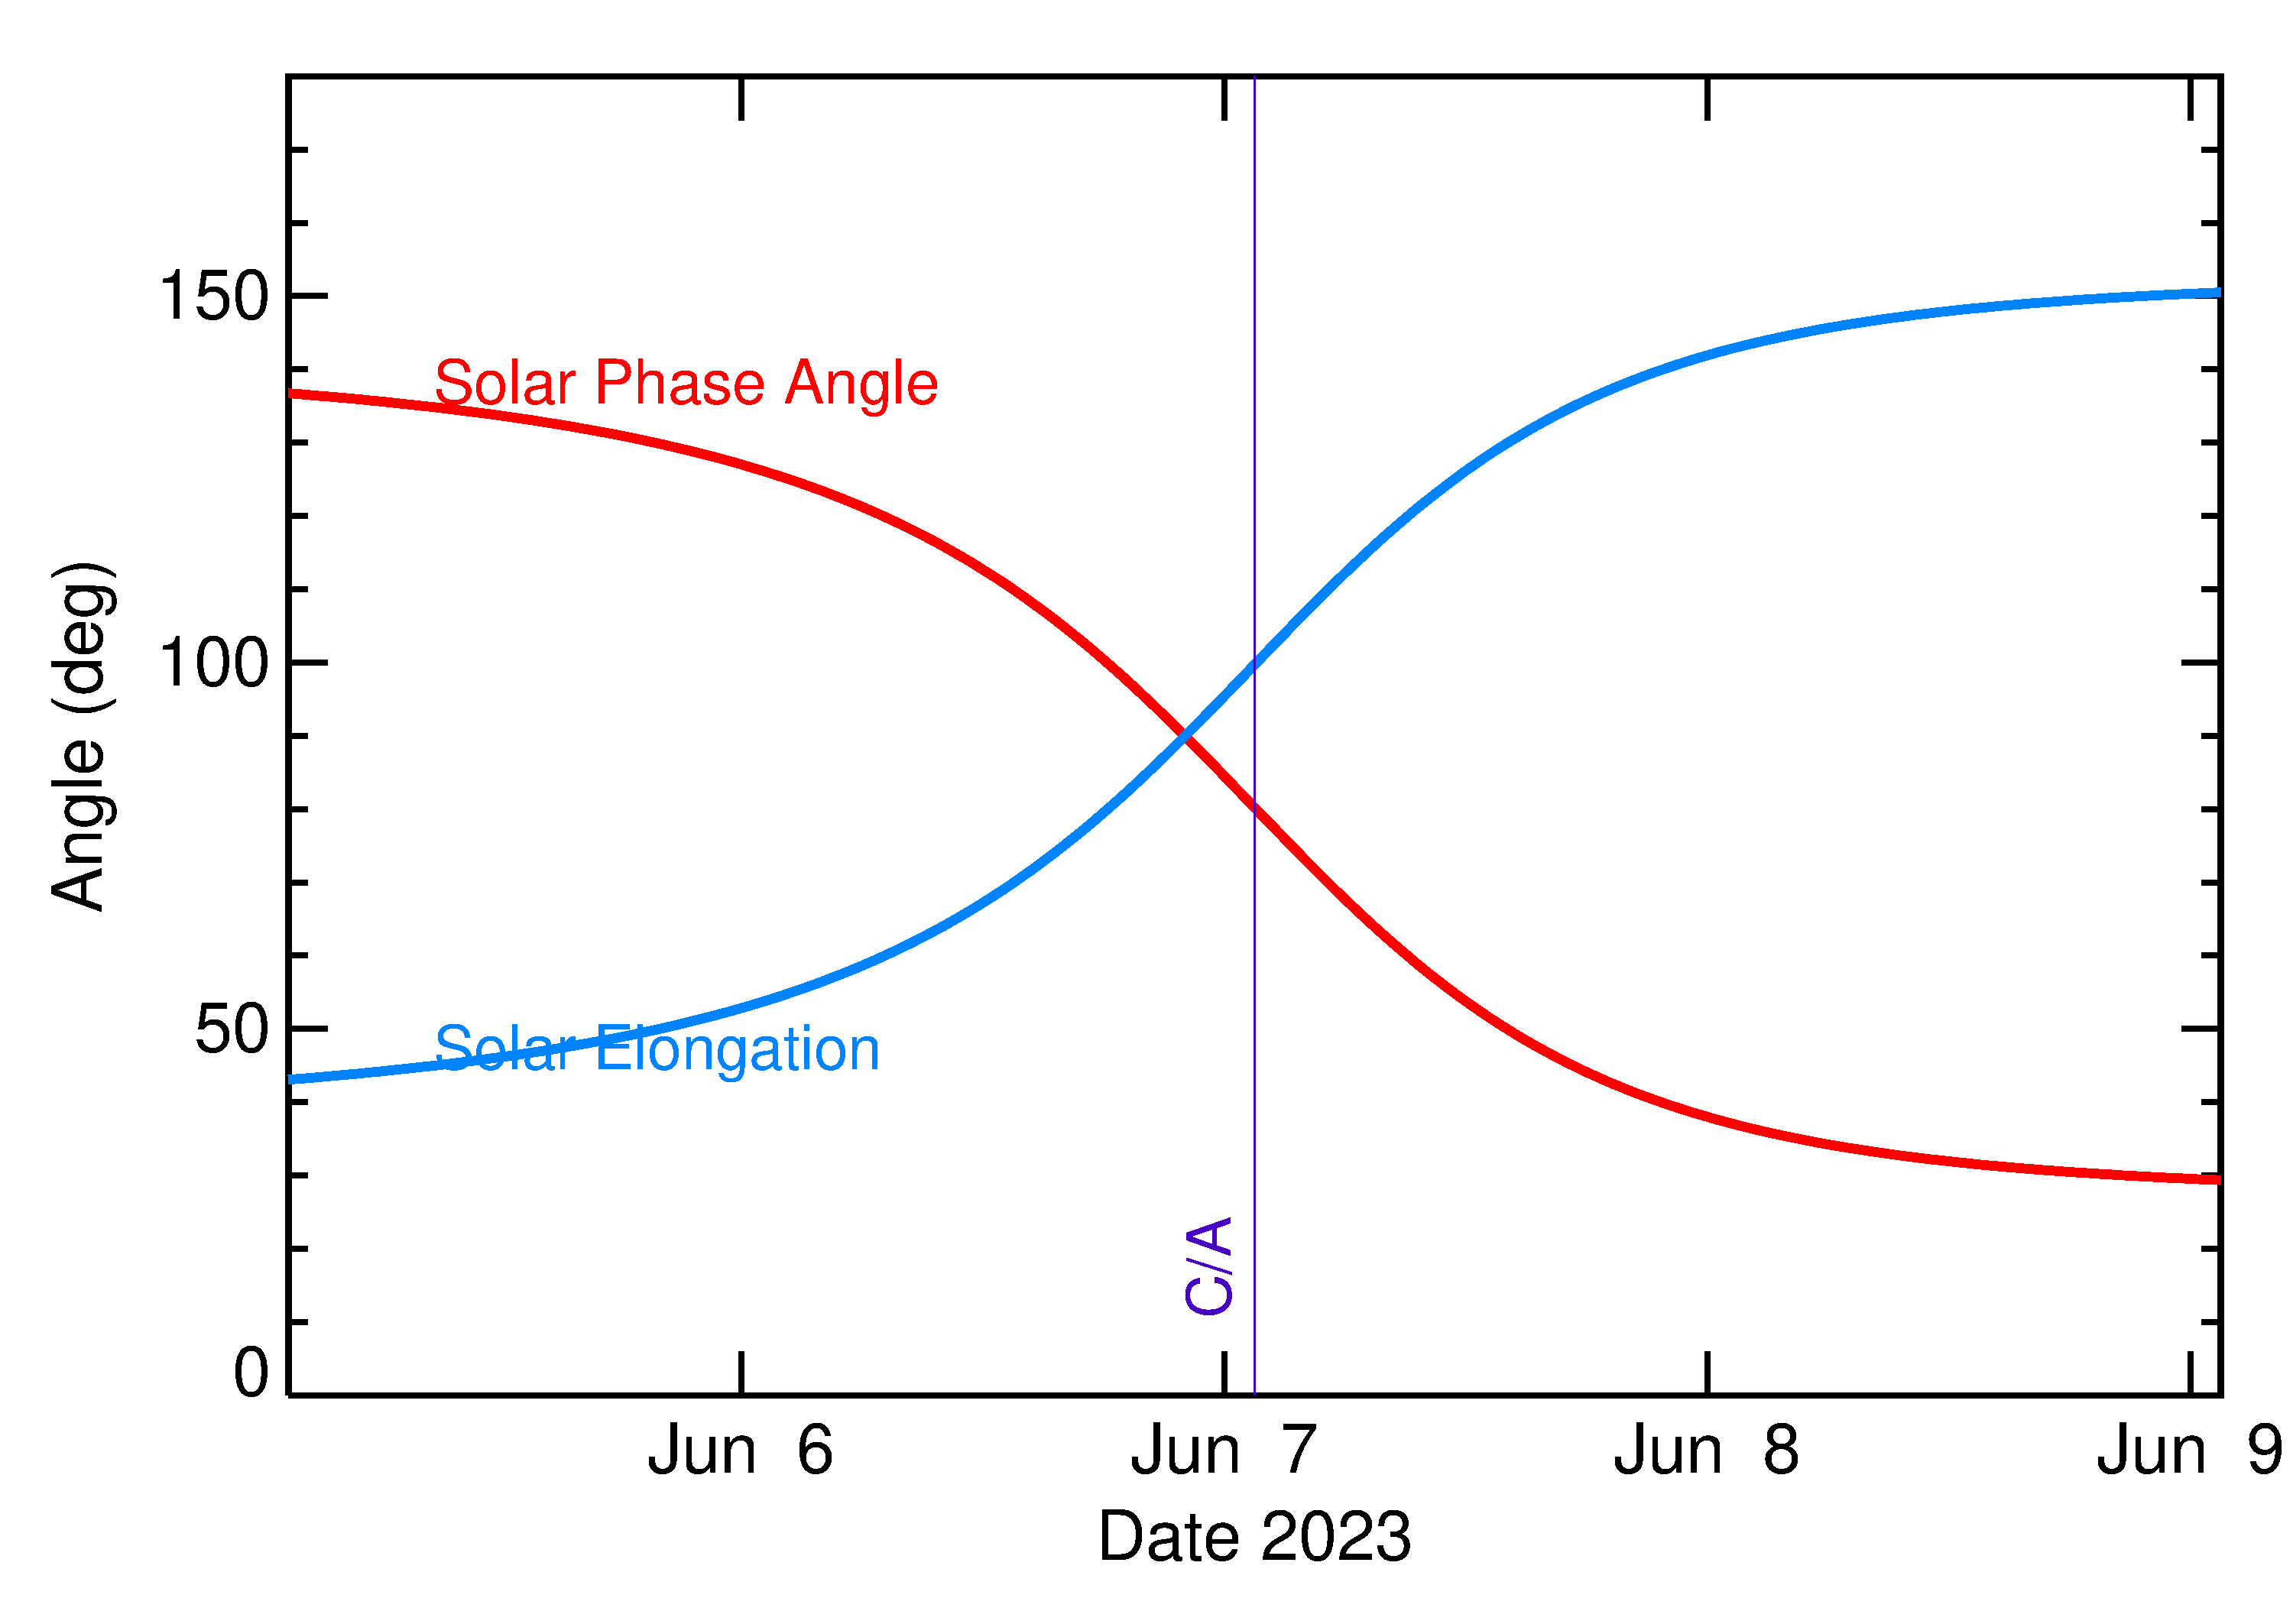 Solar Elongation and Solar Phase Angle of 2023 LC in the days around closest approach